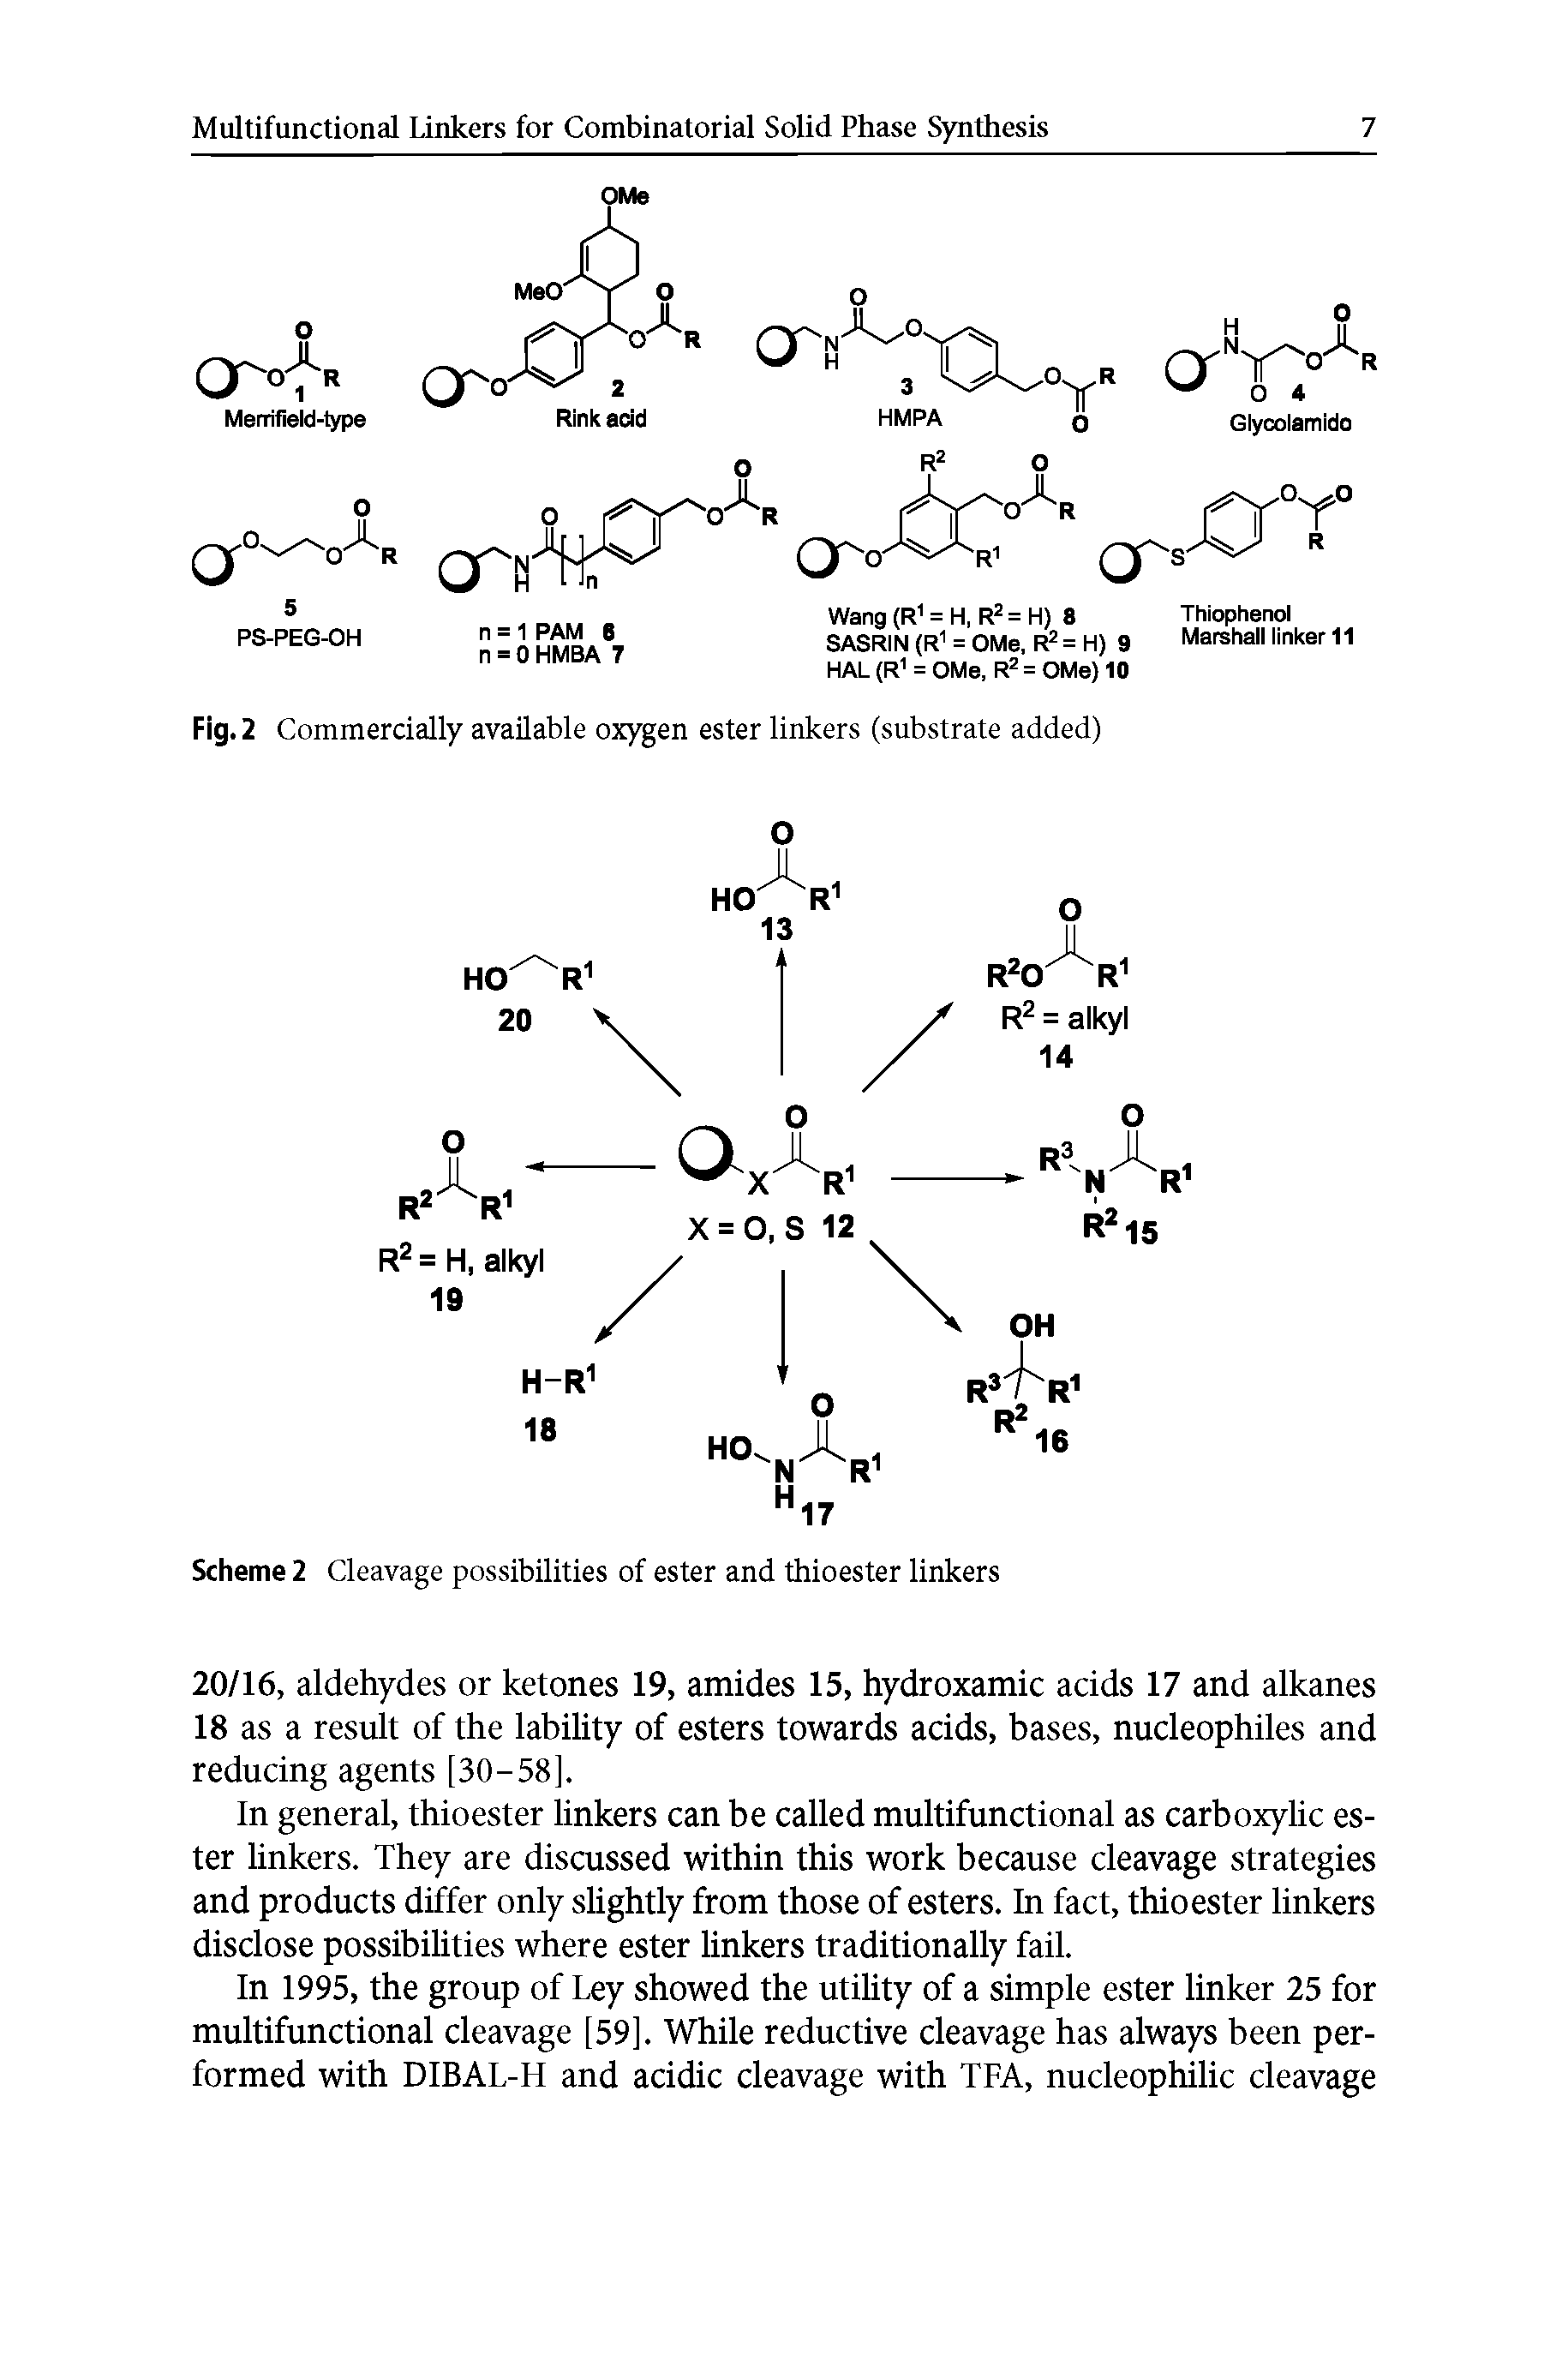 Scheme 2 Cleavage possibilities of ester and thioester linkers...